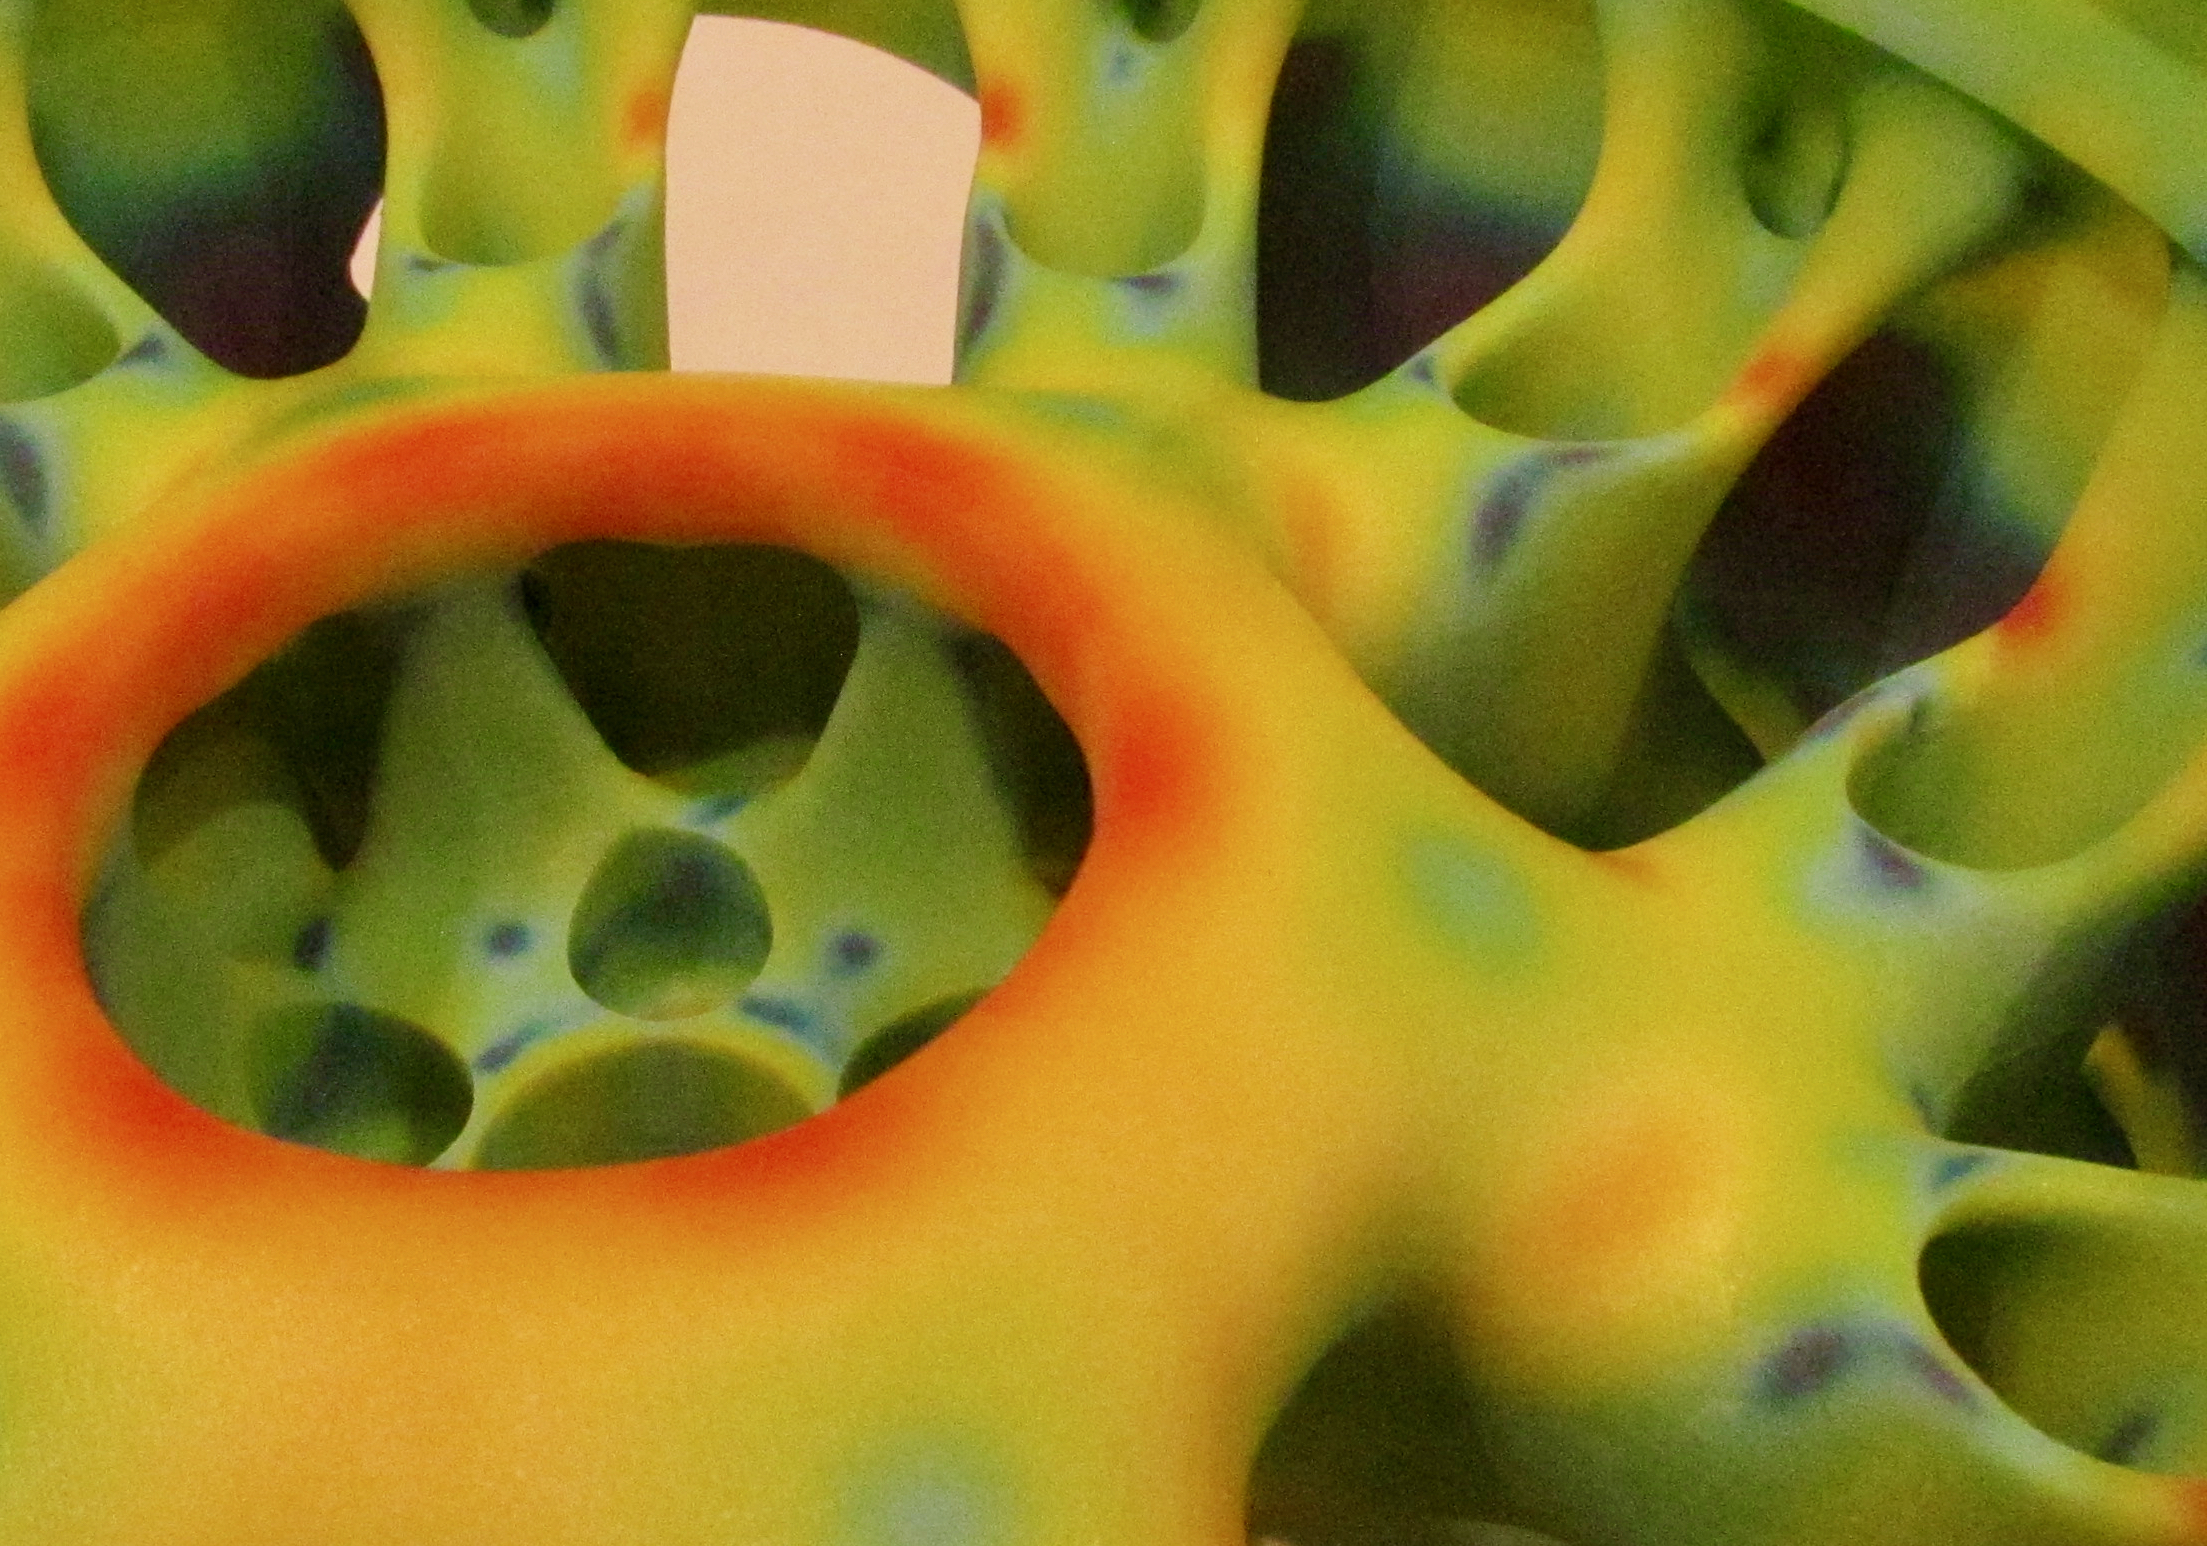  Detail of the Stratasys engineering visualization print 